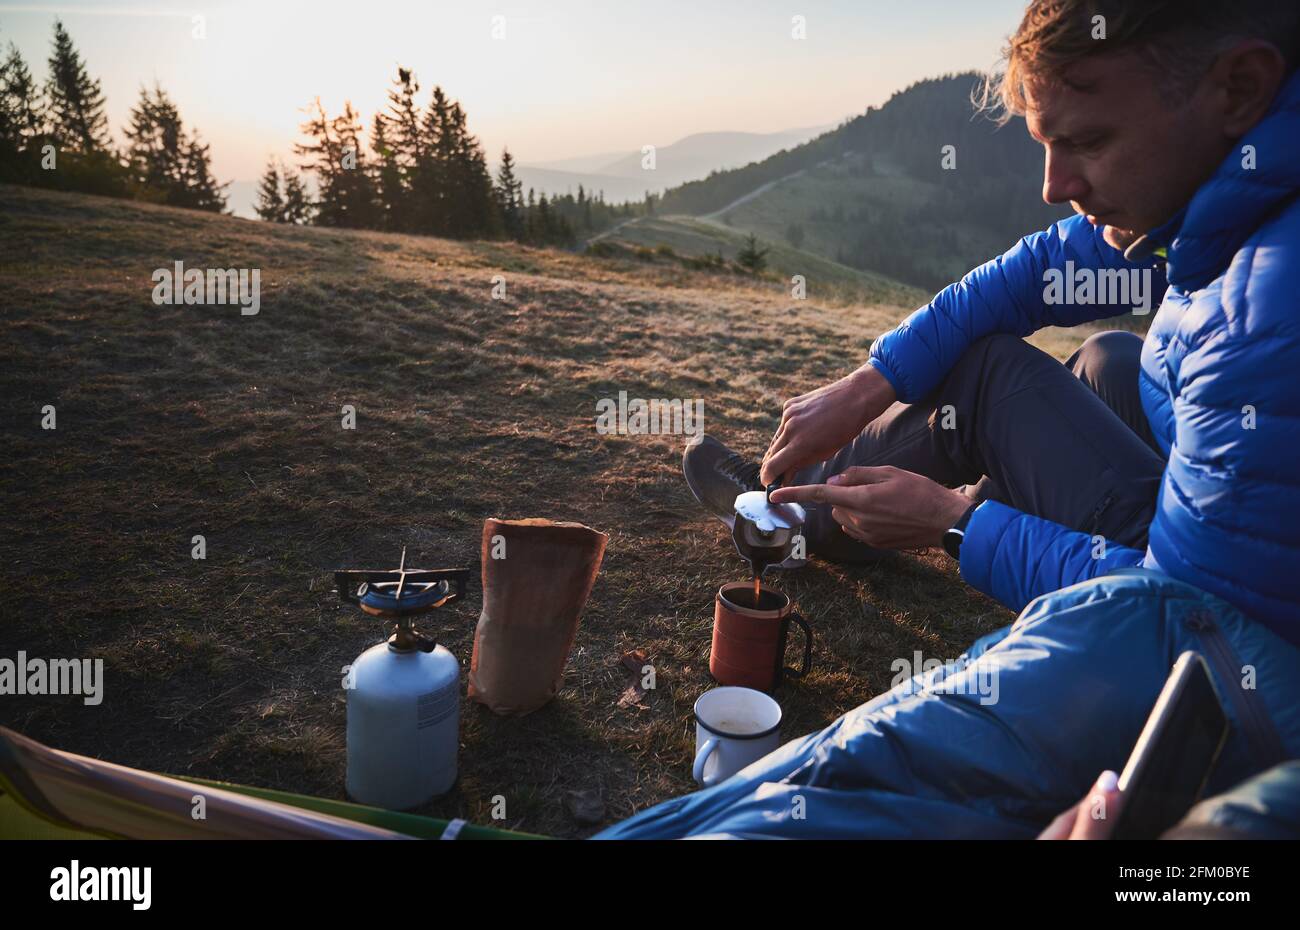 https://c8.alamy.com/comp/2FM0BYE/handsome-young-man-traveler-sitting-on-grassy-hill-near-camp-tent-and-pouring-hot-drink-into-cup-male-hiker-making-coffee-concept-of-hiking-camping-and-tourist-equipment-2FM0BYE.jpg